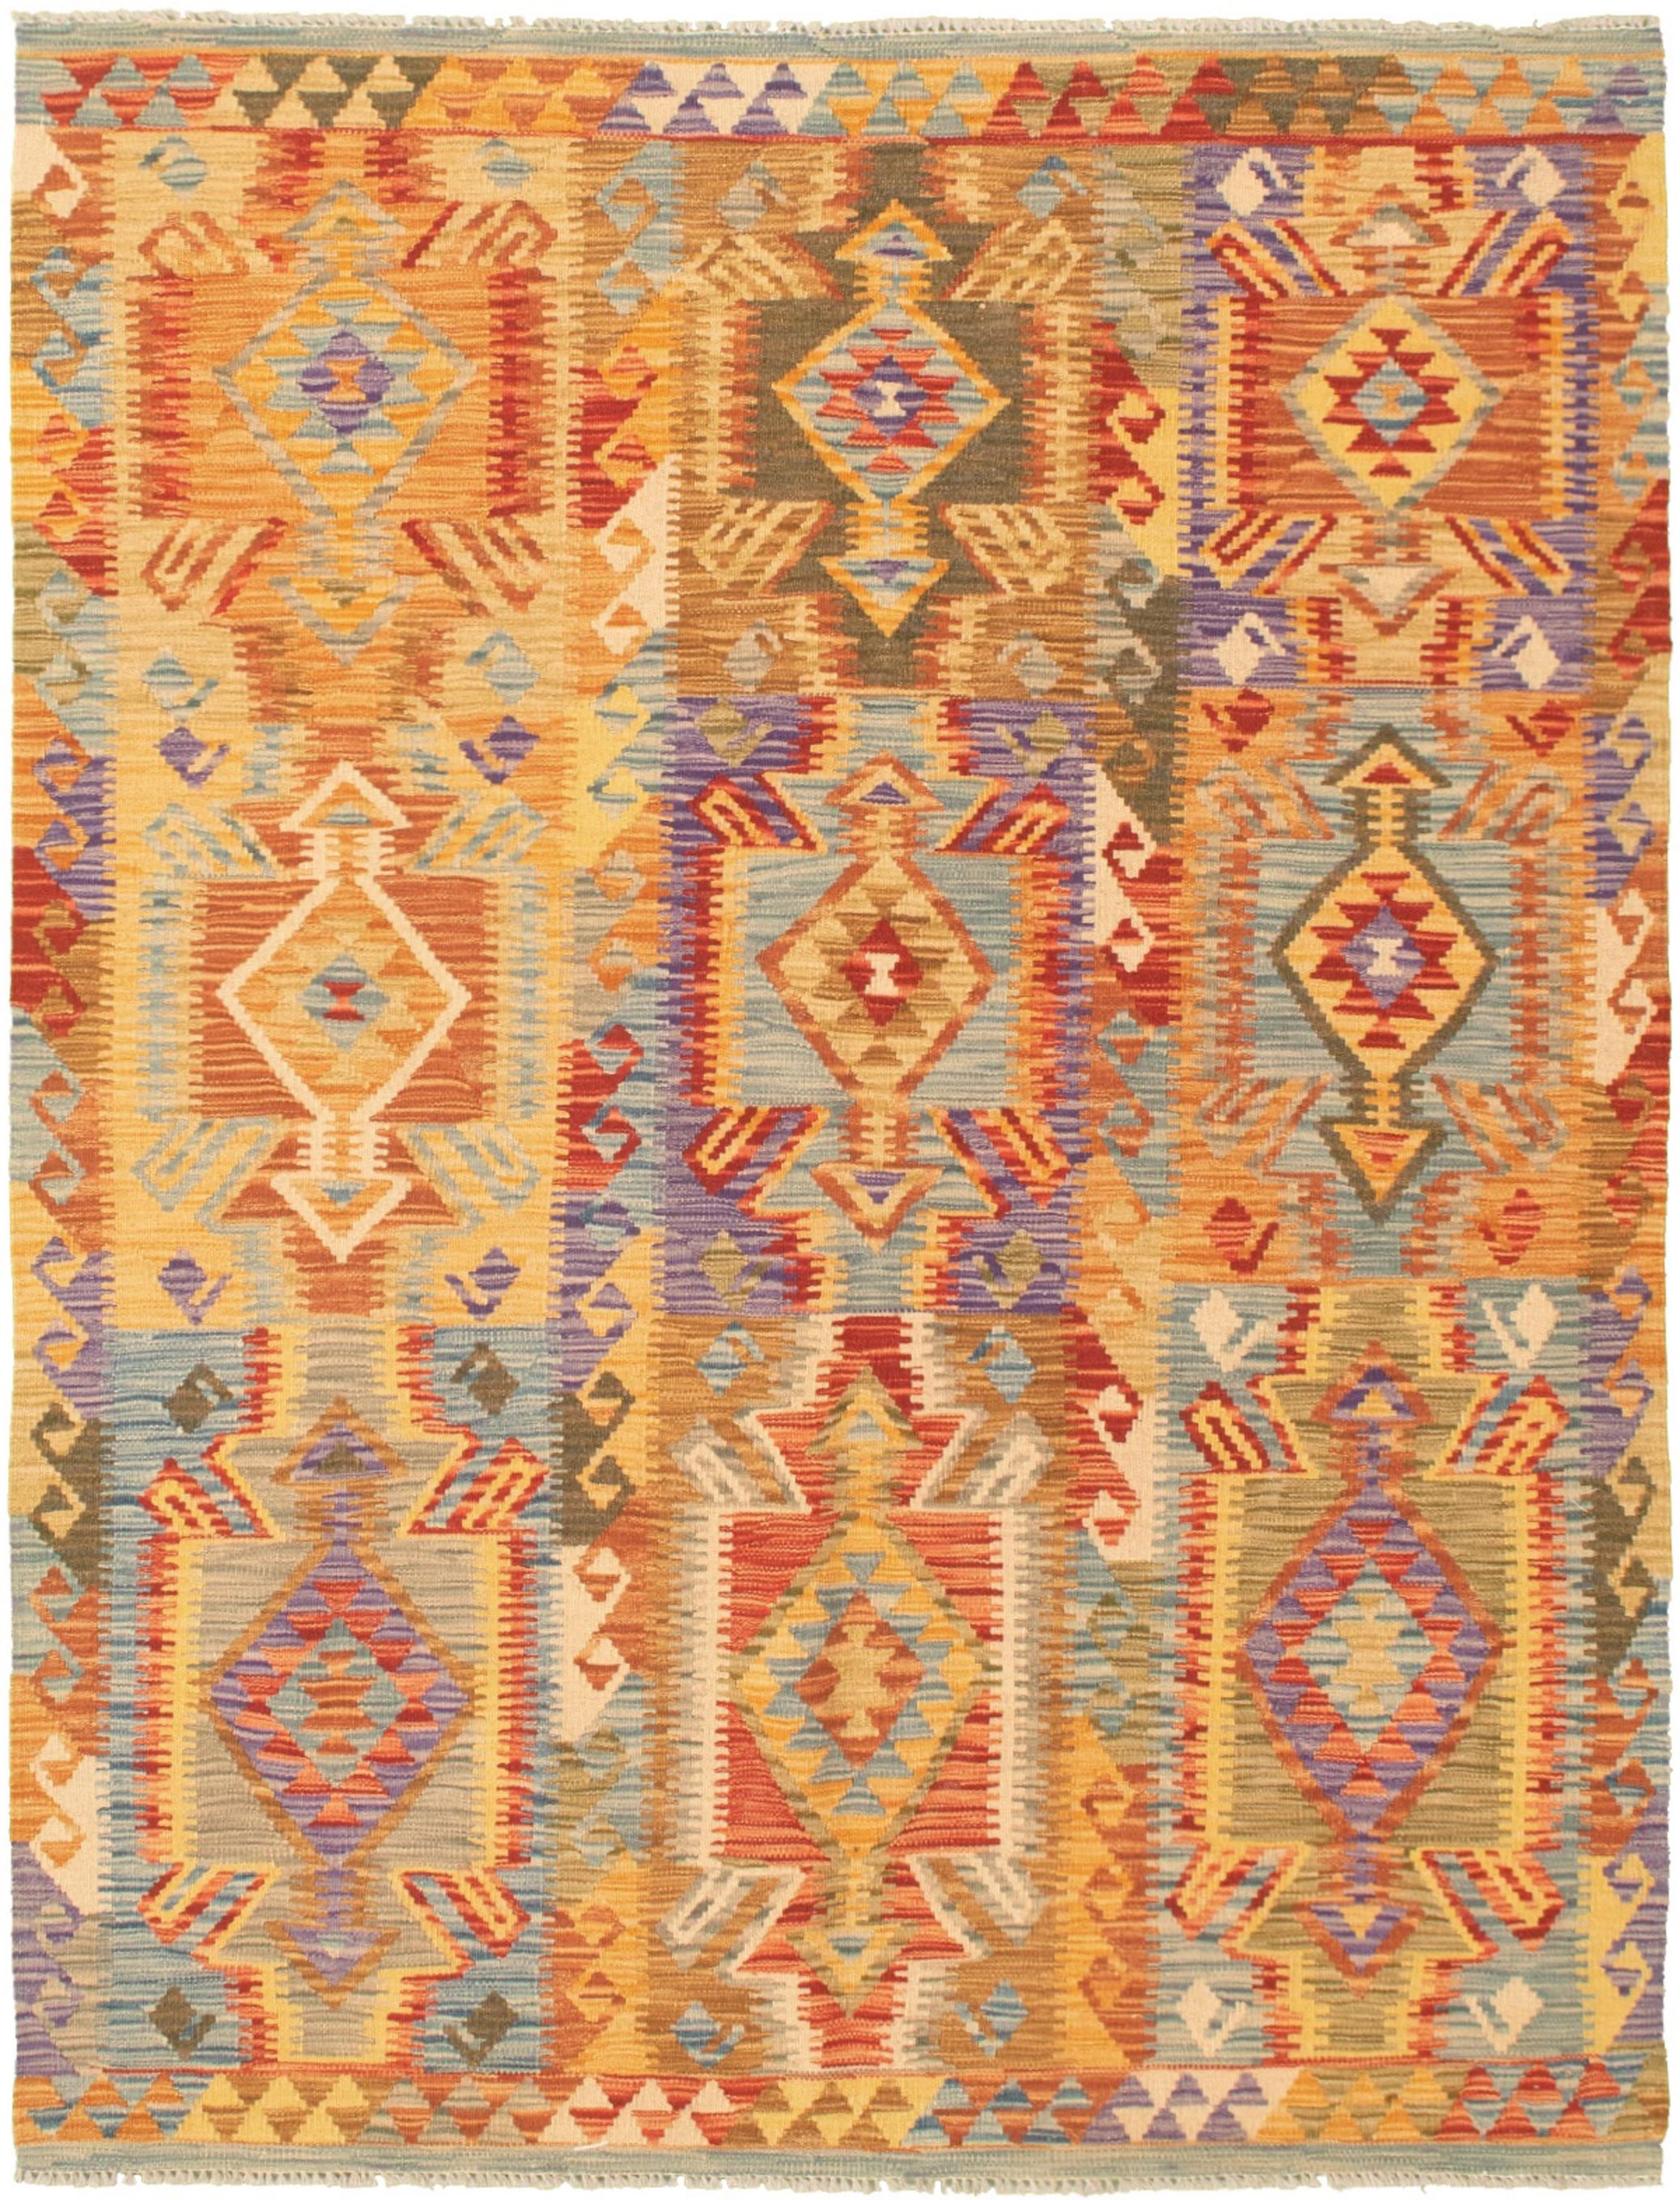 Hand woven Bold and Colorful  Copper, Red  Kilim 5'1" x 6'8" Size: 5'1" x 6'8"  